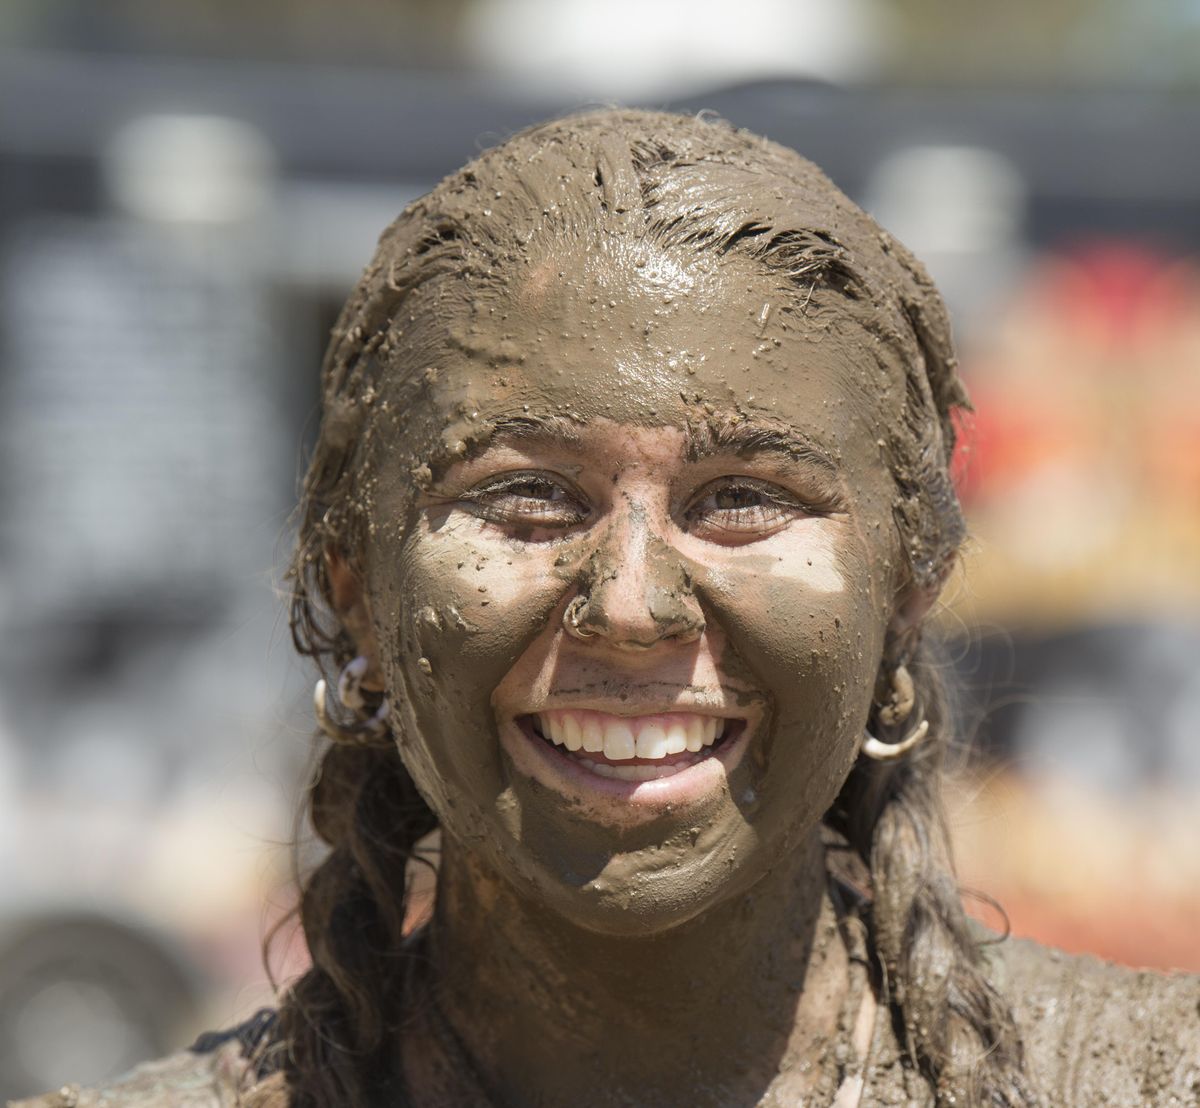 Haley Meacham, of Spokane, ends the Dirty Dash race with a face full of mud Saturday, July 8, 2017, at Riverside State Park. The popular foot race takes contestants through mud bogs and over obstacles. (Jesse Tinsley / The Spokesman-Review)